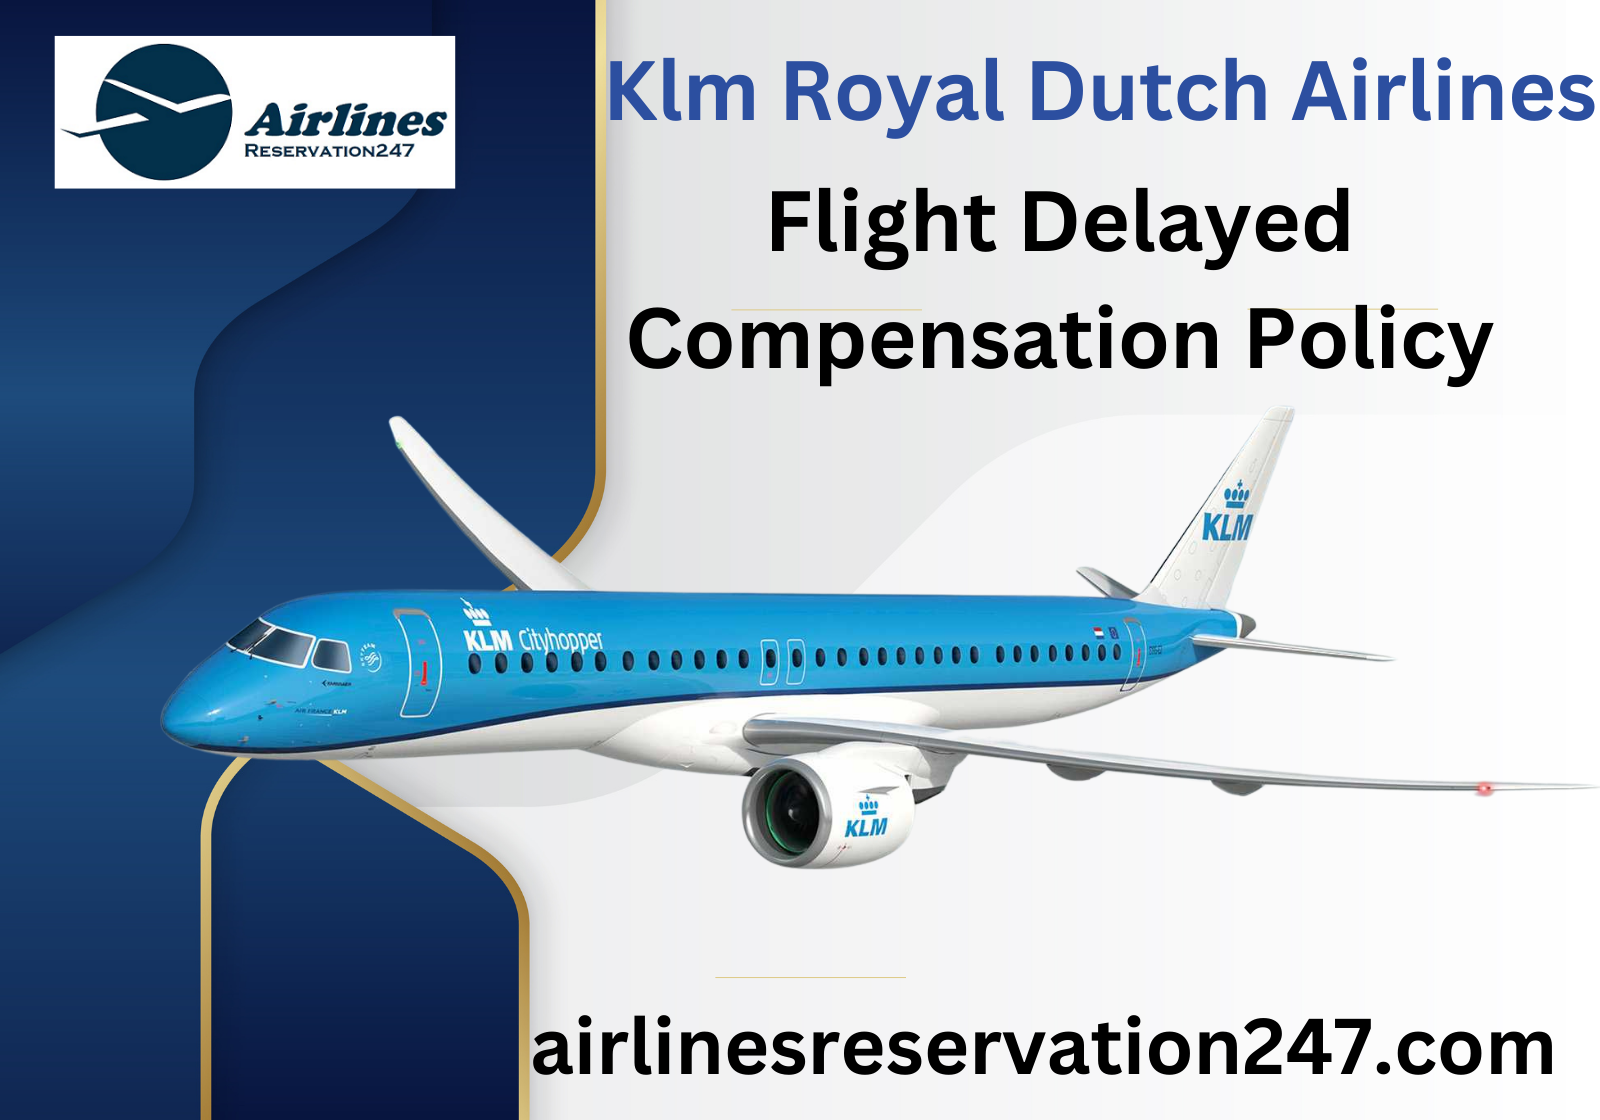 Klm Royal Dutch Airlines Flight Delayed Compensation Policy